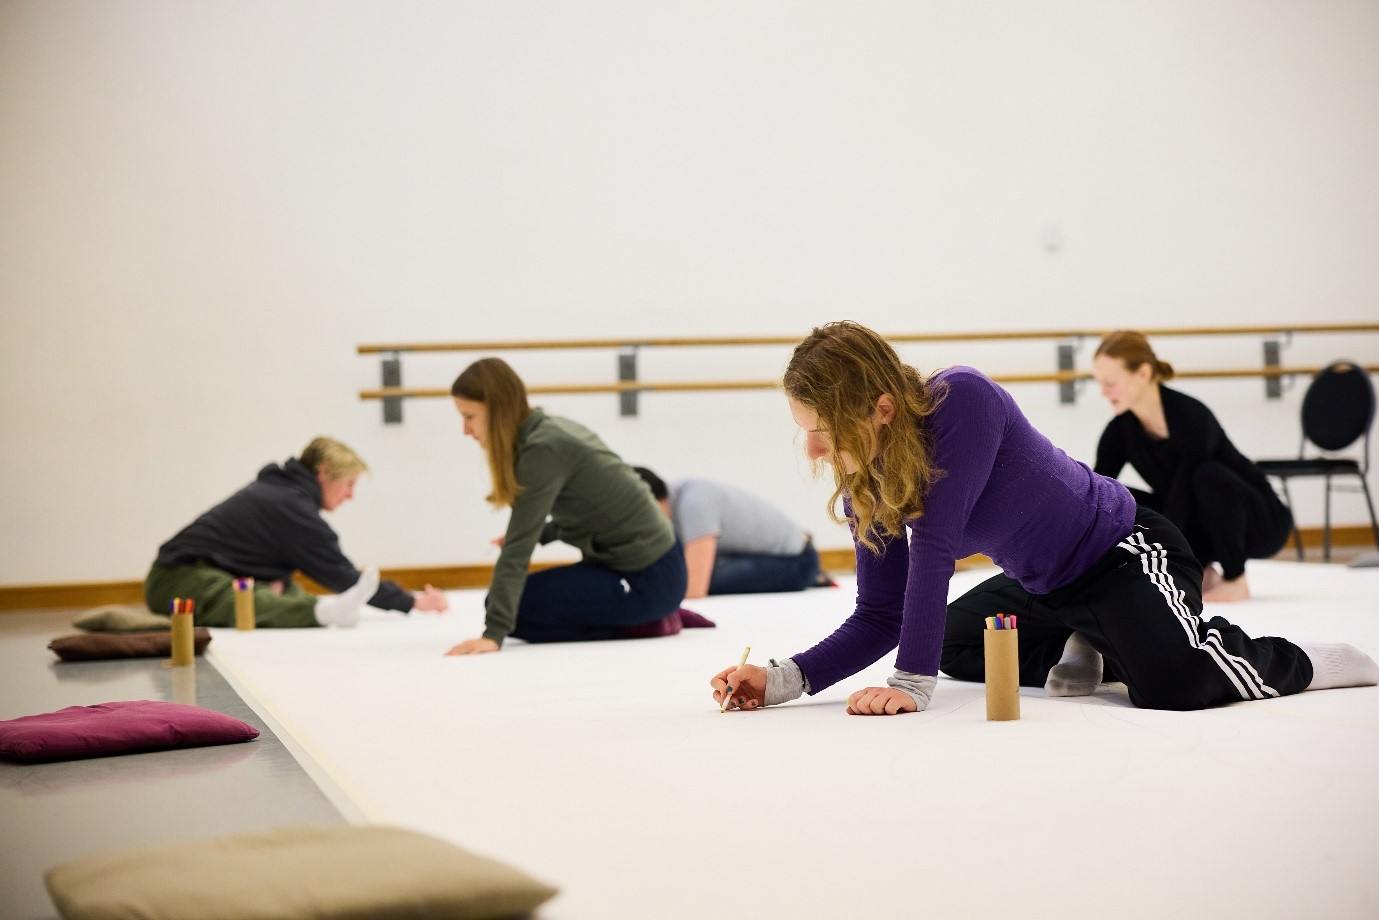 People sit on the floor drawing on a large white sheet of paper